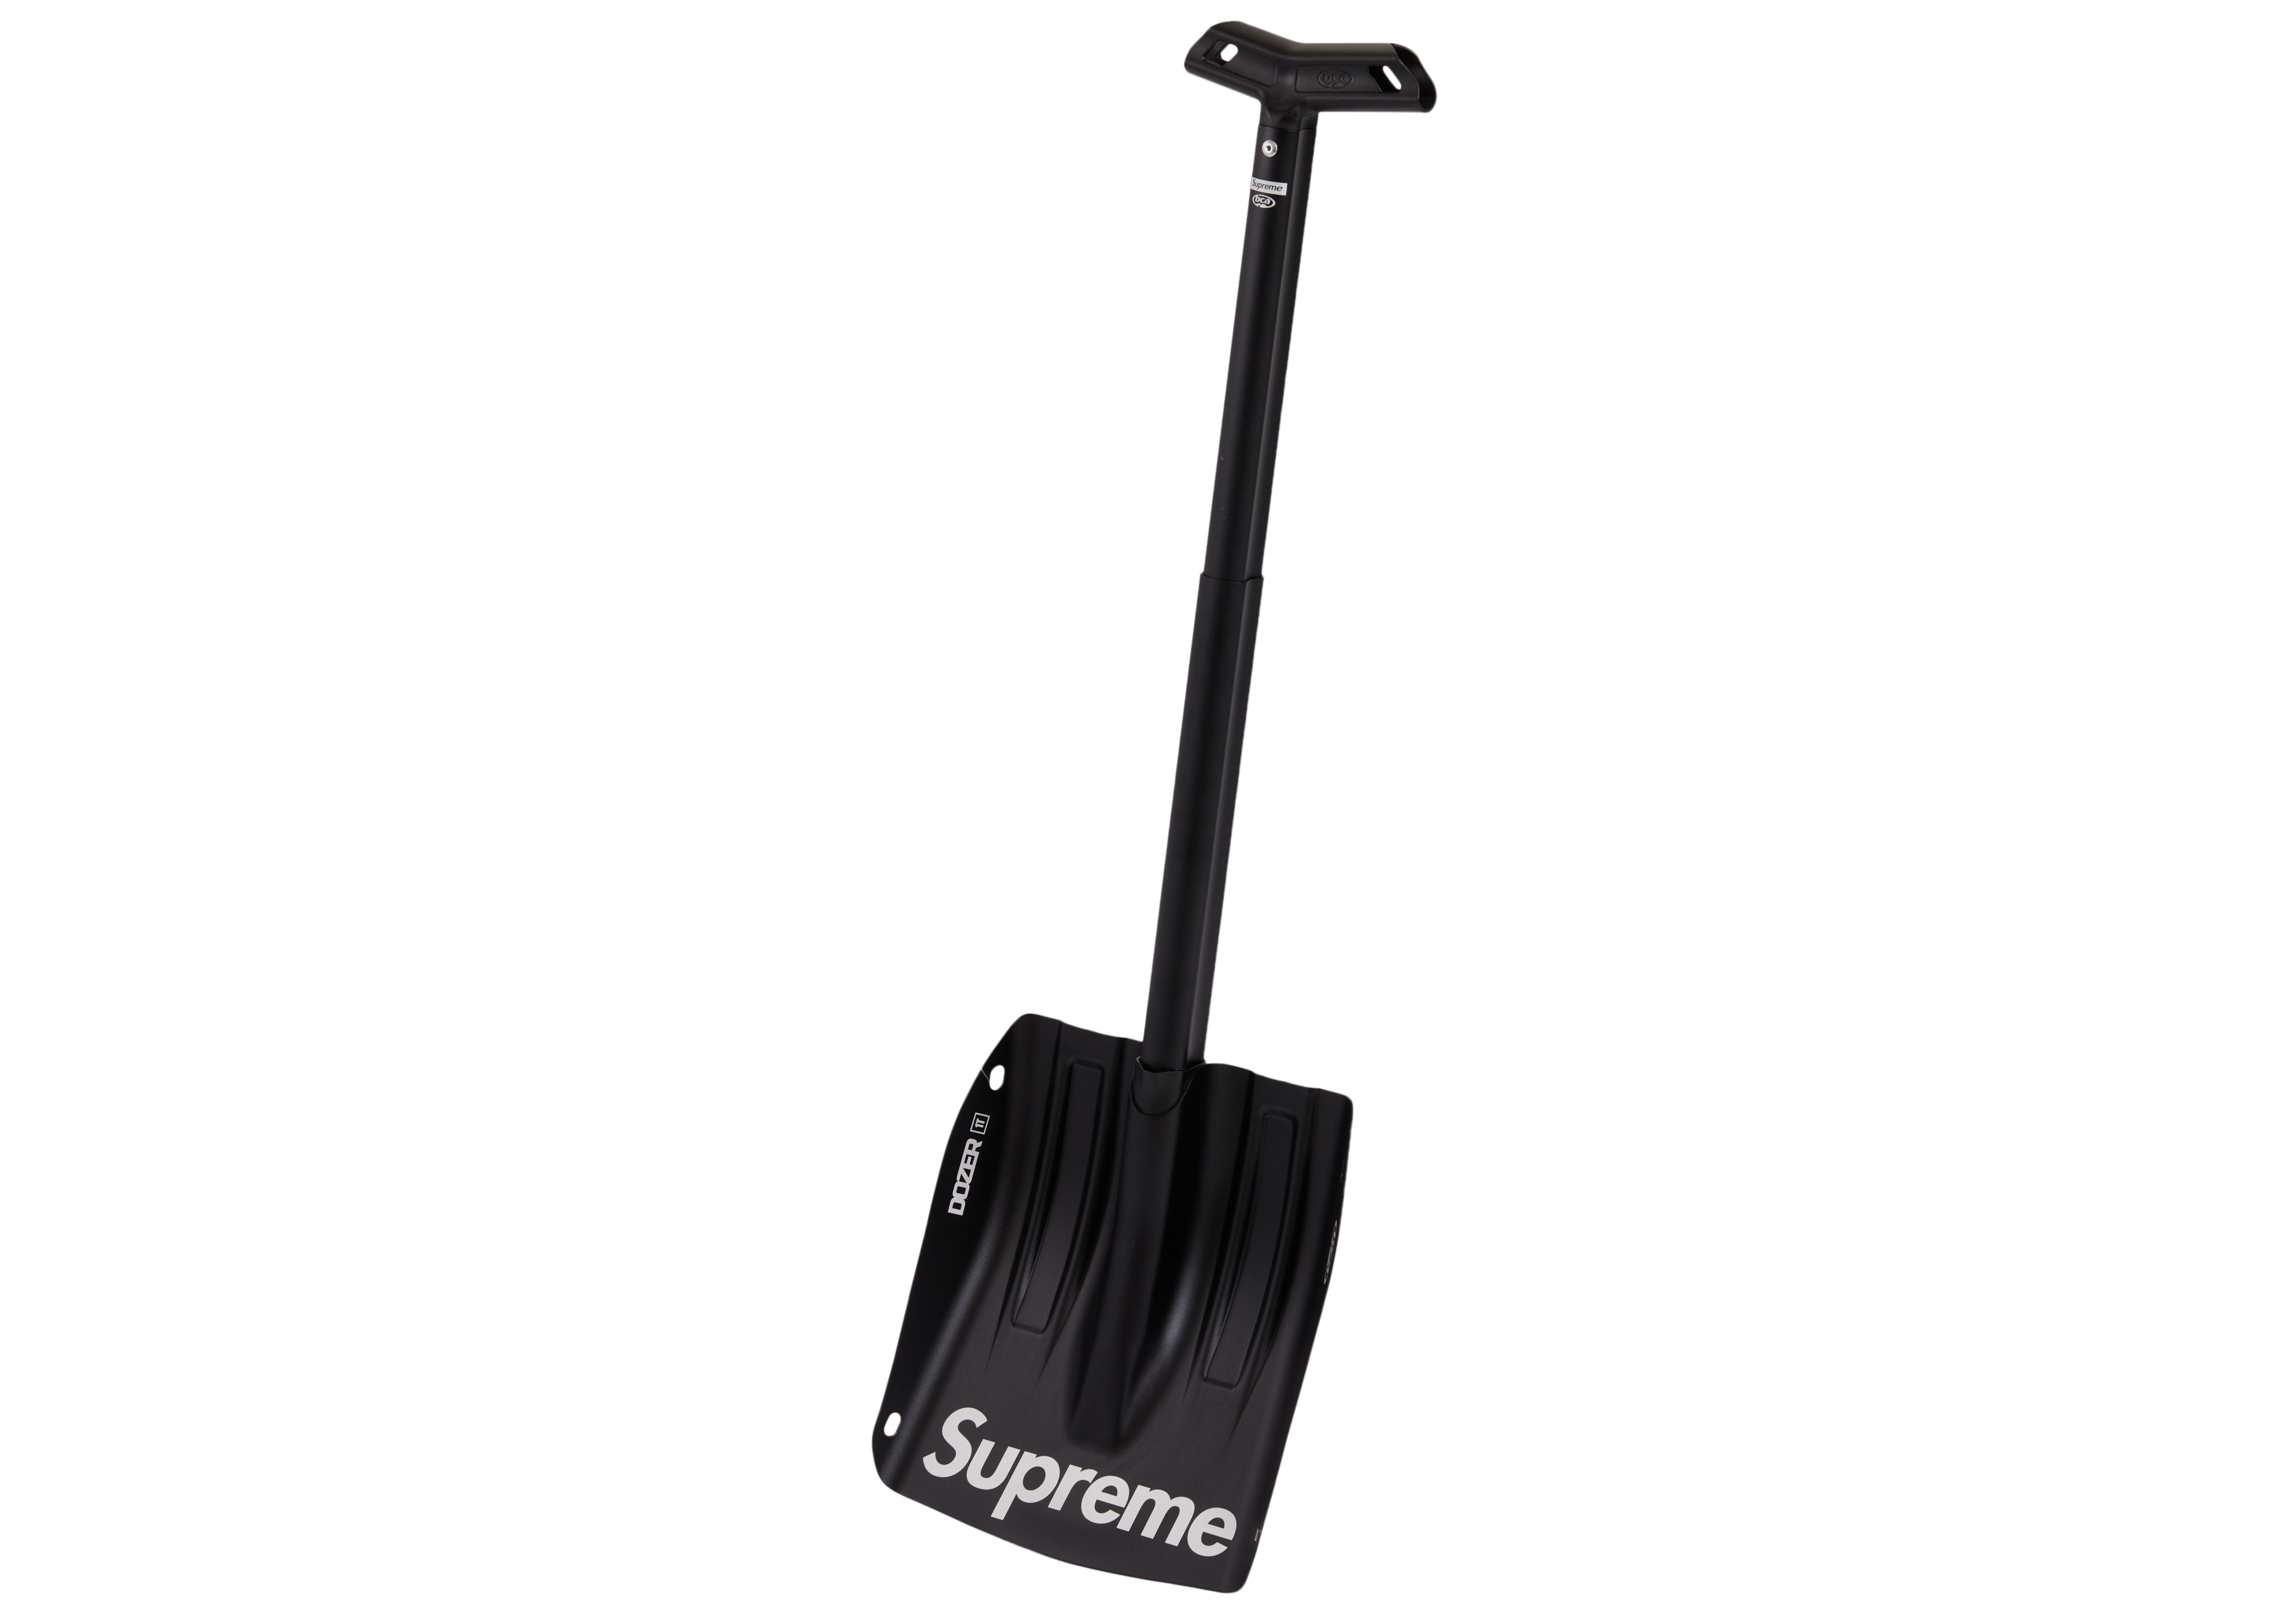 NEW即納Supreme / Backcountry Access Snow Shovel その他